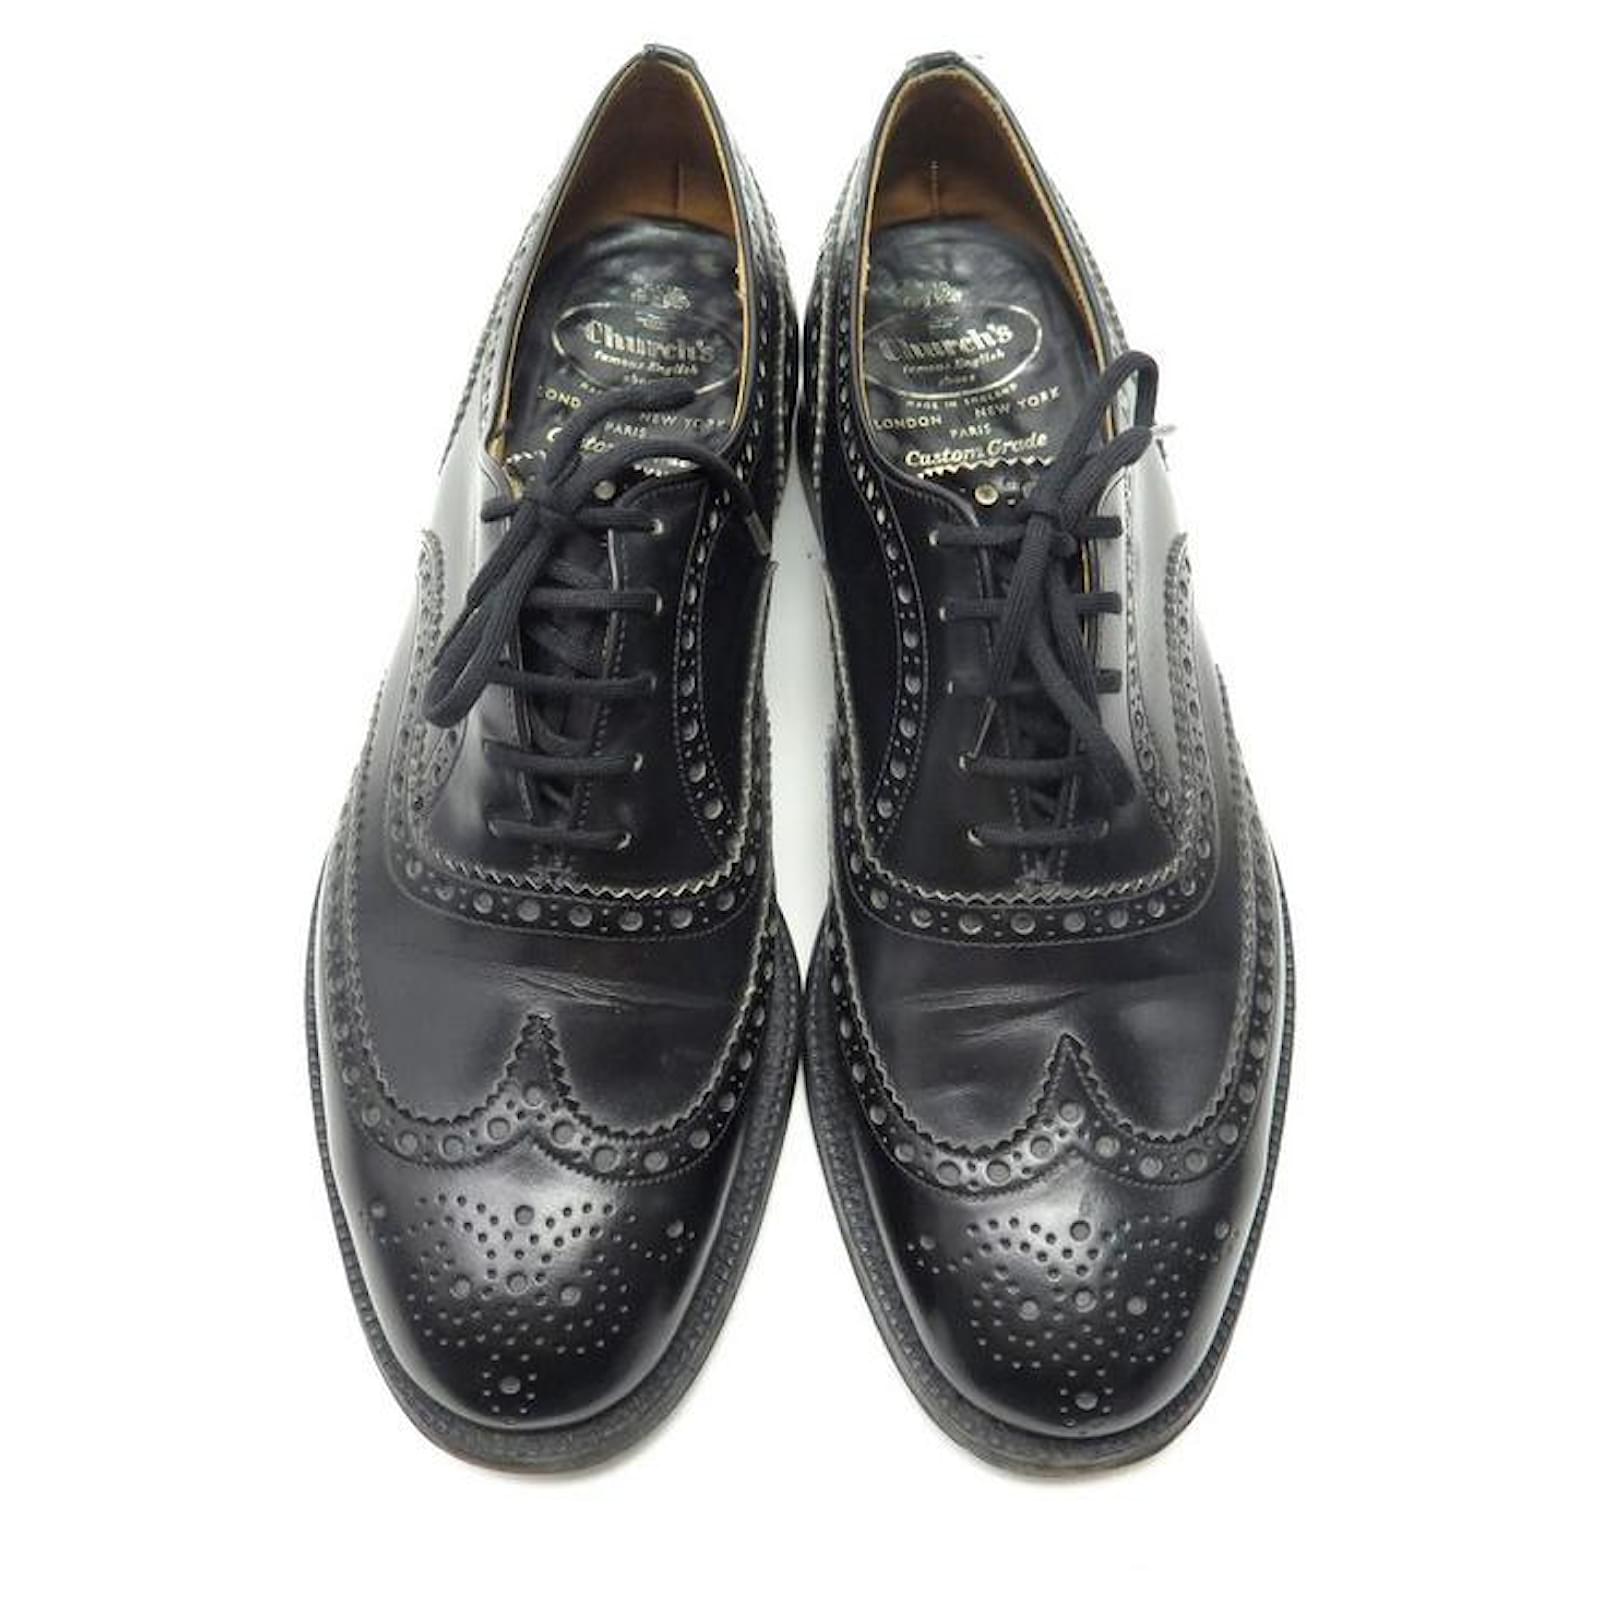 CHURCH'S BURWOOD SHOES 8.5F 42.5 BLACK LEATHER FLORAL TOE oxford 